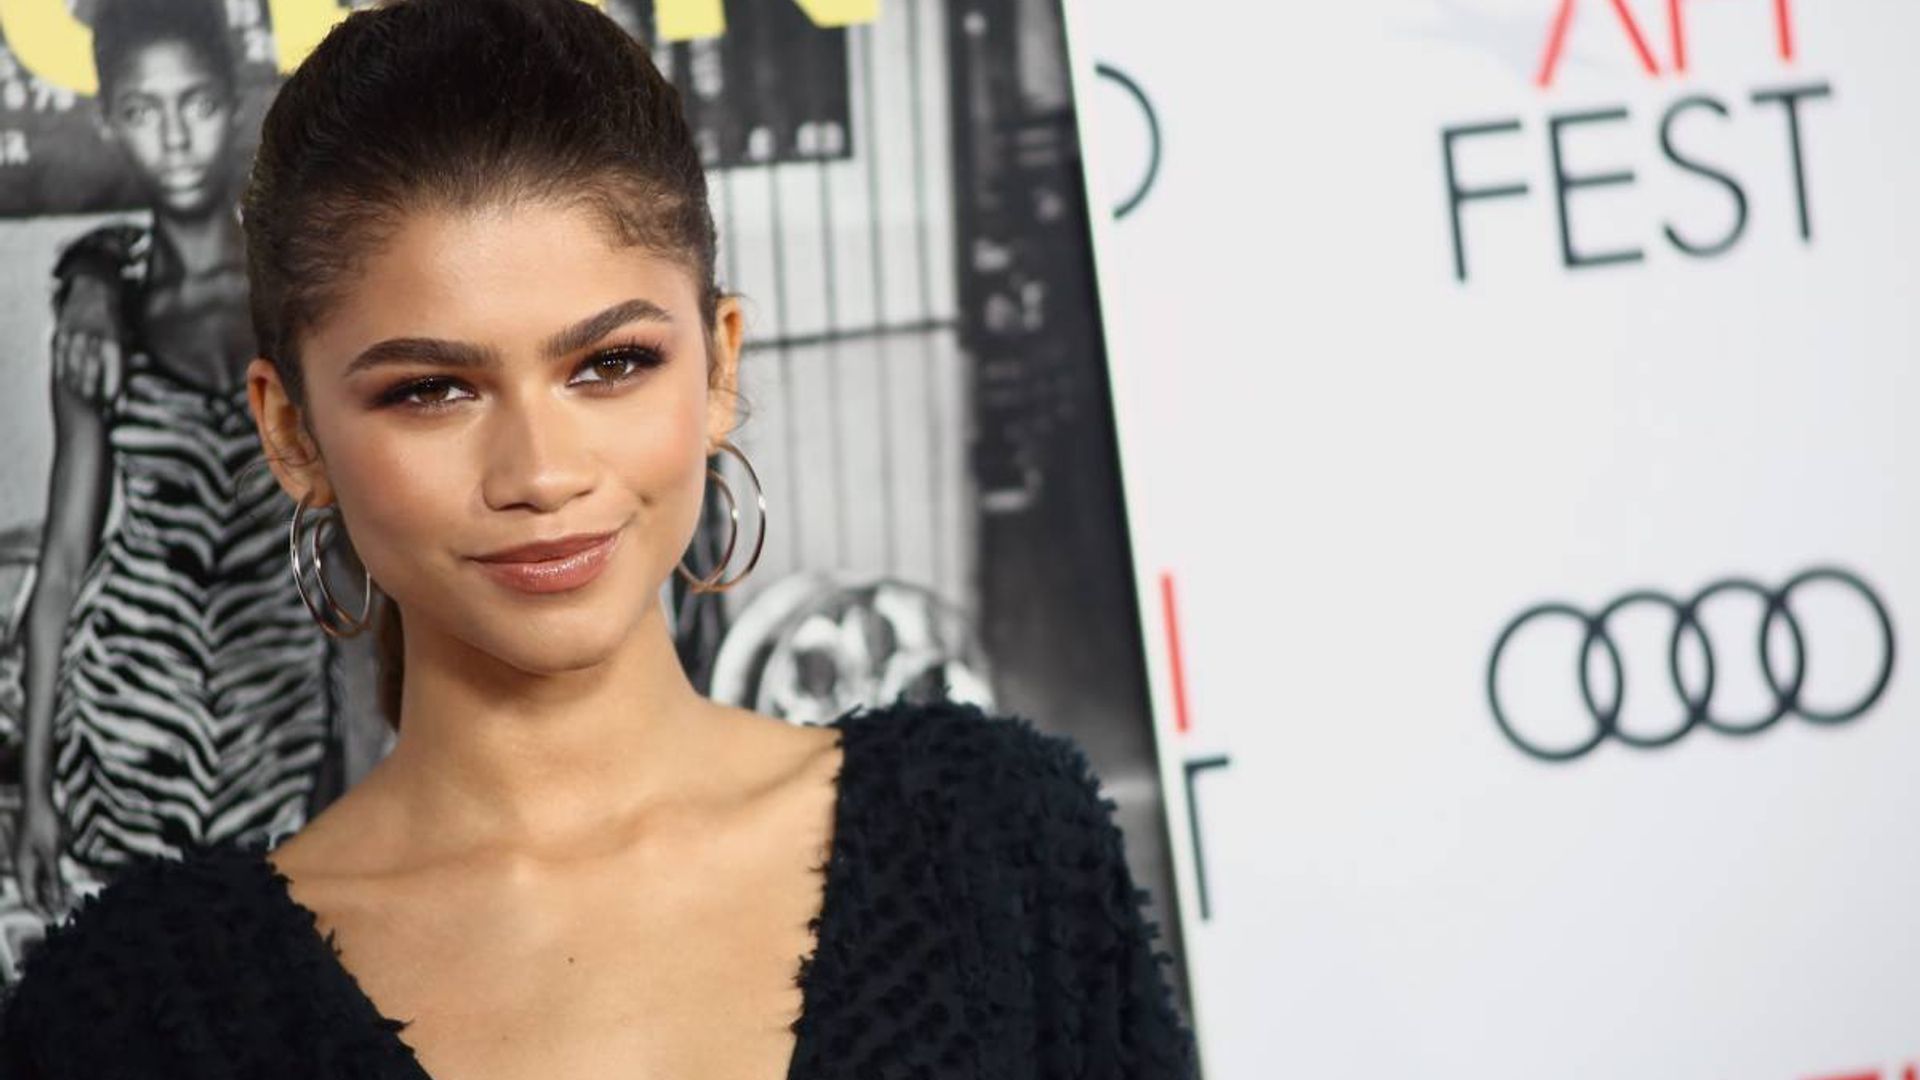 Zendaya just sparked a new trend with her stunning style transformation